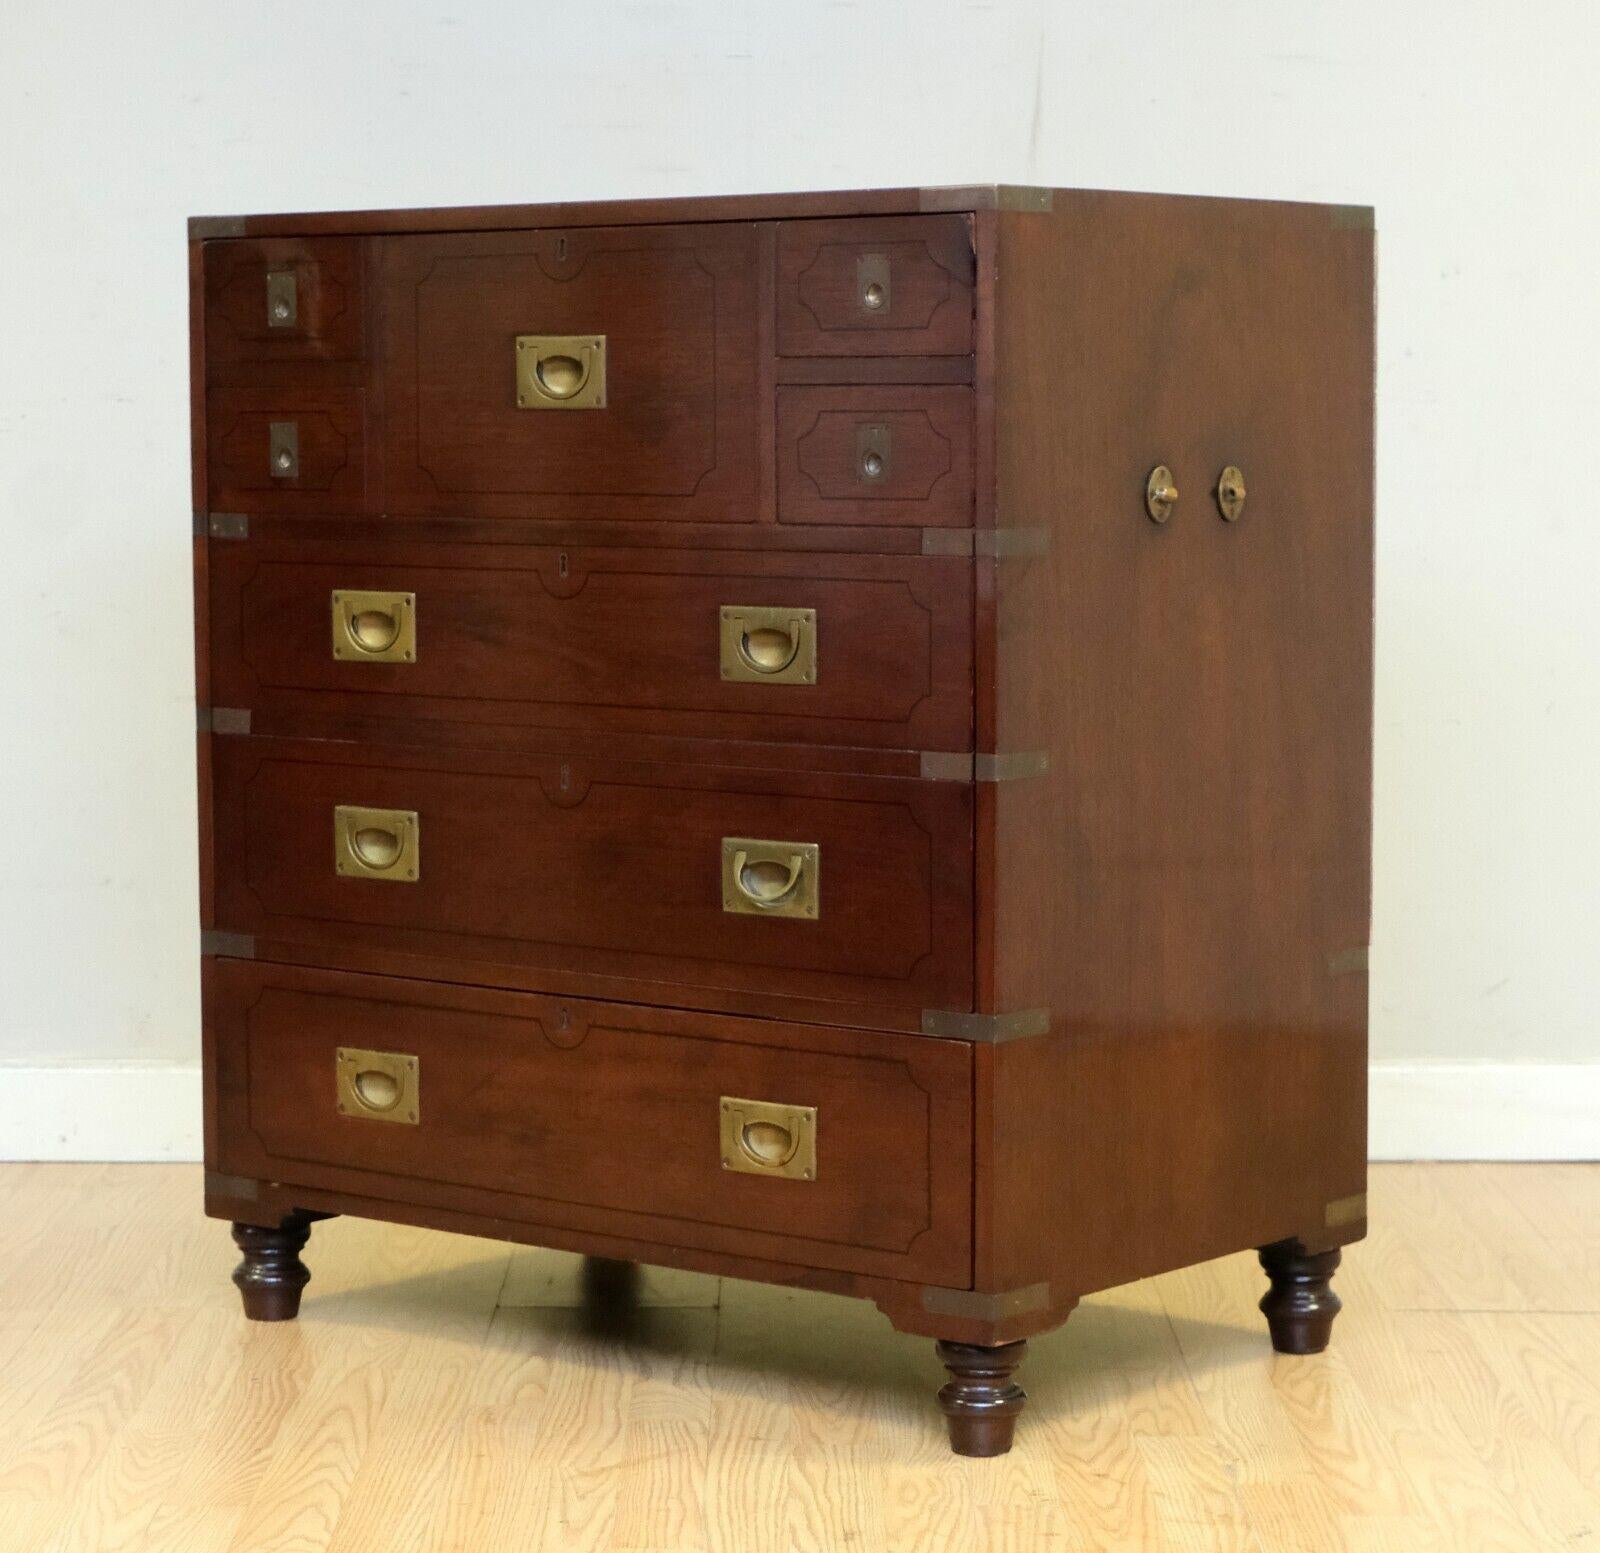 We are delighted to offer for sale this lovely military campaign, mahogany cabinet with false drawers and one real drawer.

This aesthetically attractive and well made cabinet is presented with a unique, functioning, sliding door (you first pull out